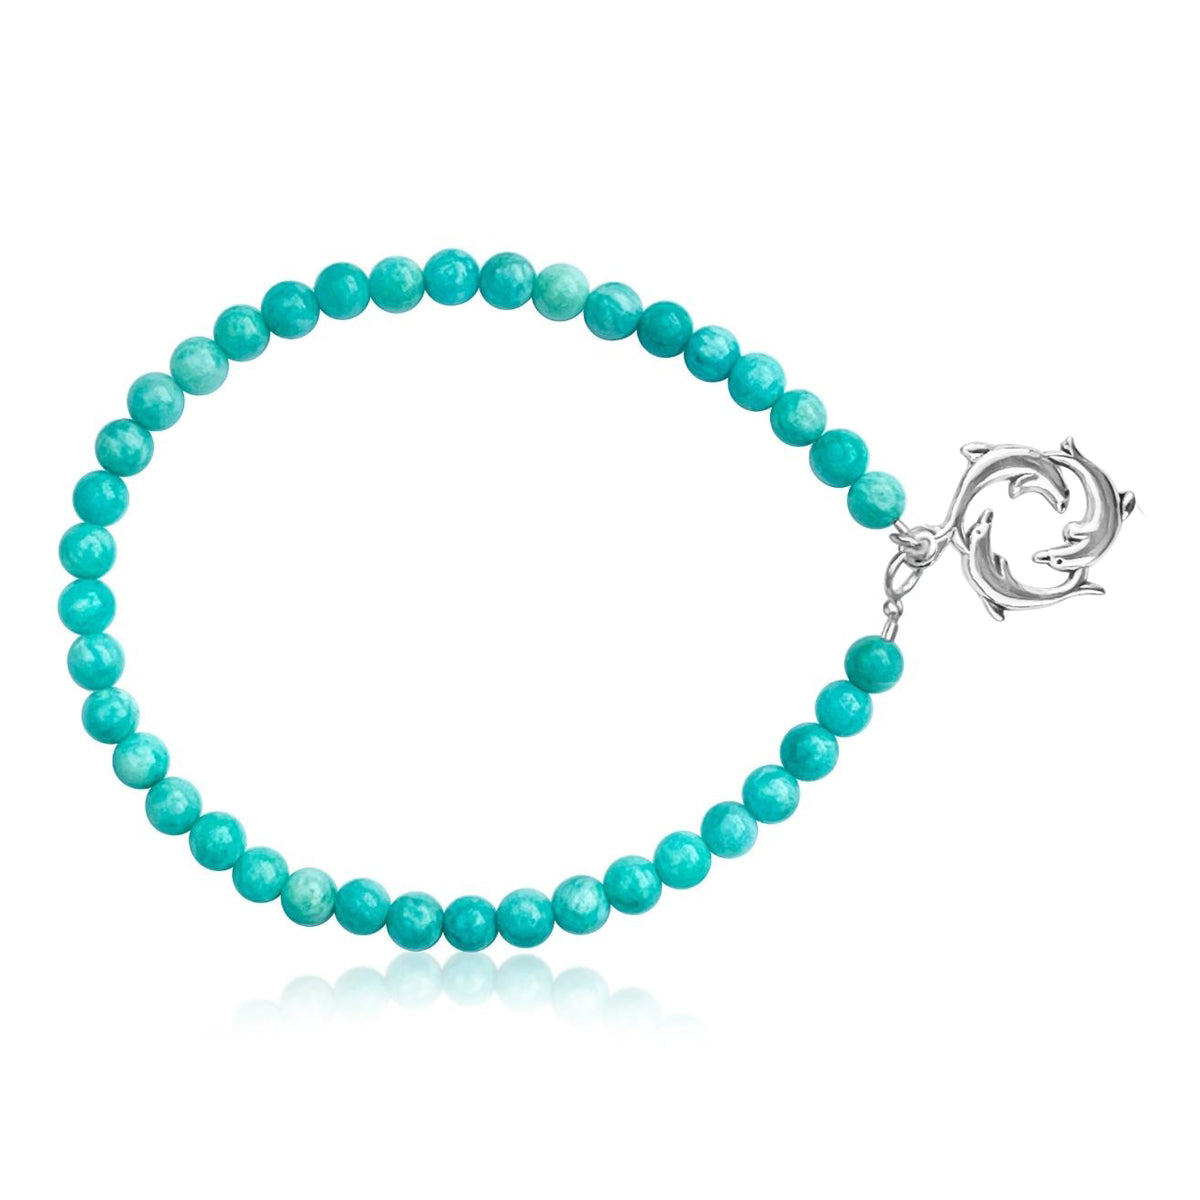 The Dolphin Dance Anklet is a beach-inspired treasure that will make every barefoot adventure even more magical!